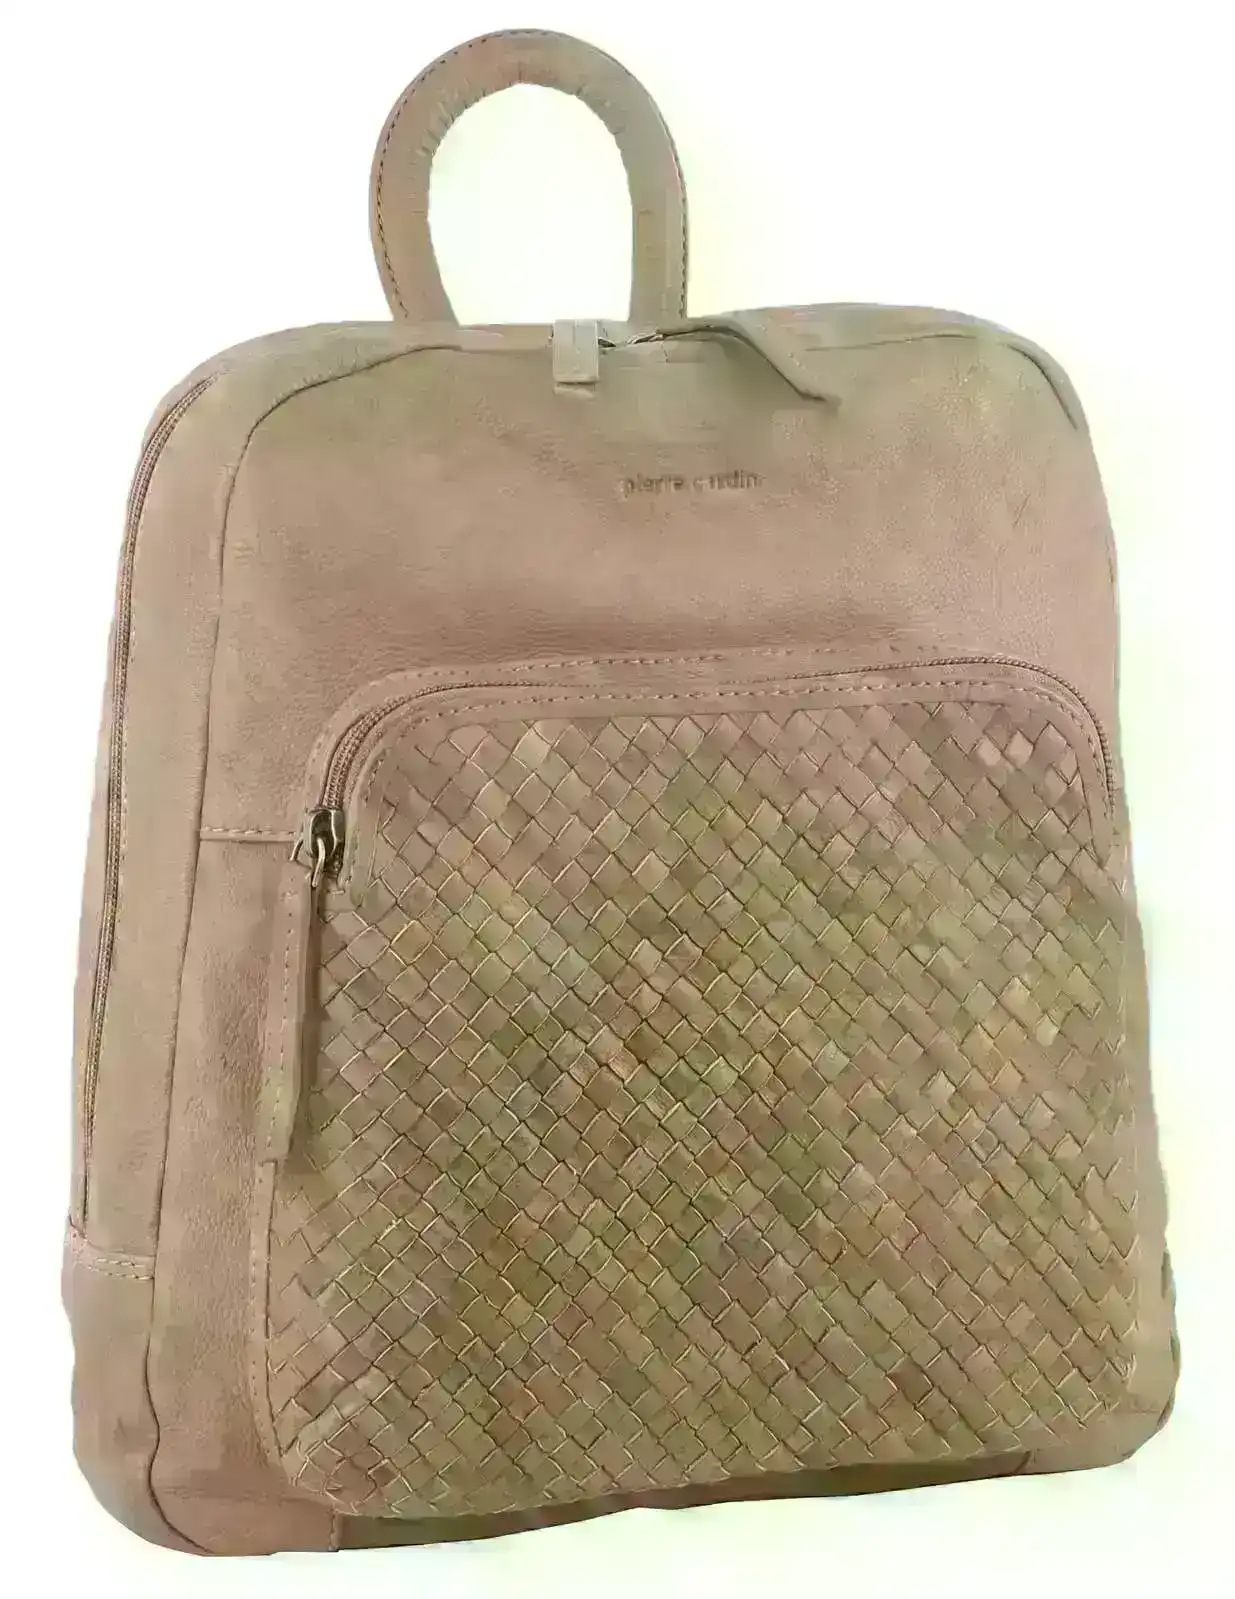 Pierre Cardin Womens Woven Leather Backpack Bag - Taupe